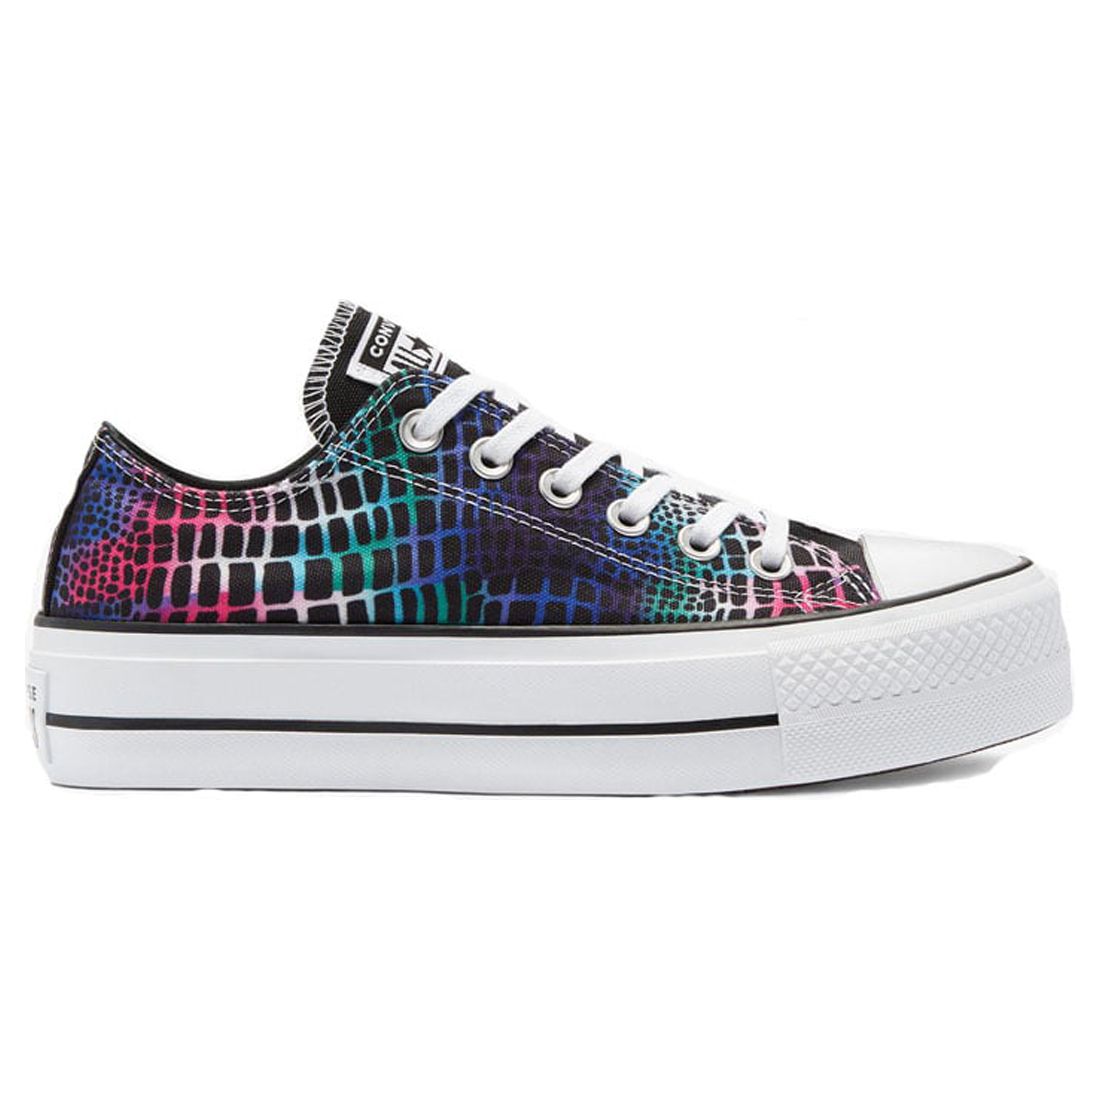 Converse Chuck Taylor All Star Low Top Women/Adult shoe size Women 9  Casual 570518C Black Hyper Pink White - image 1 of 8